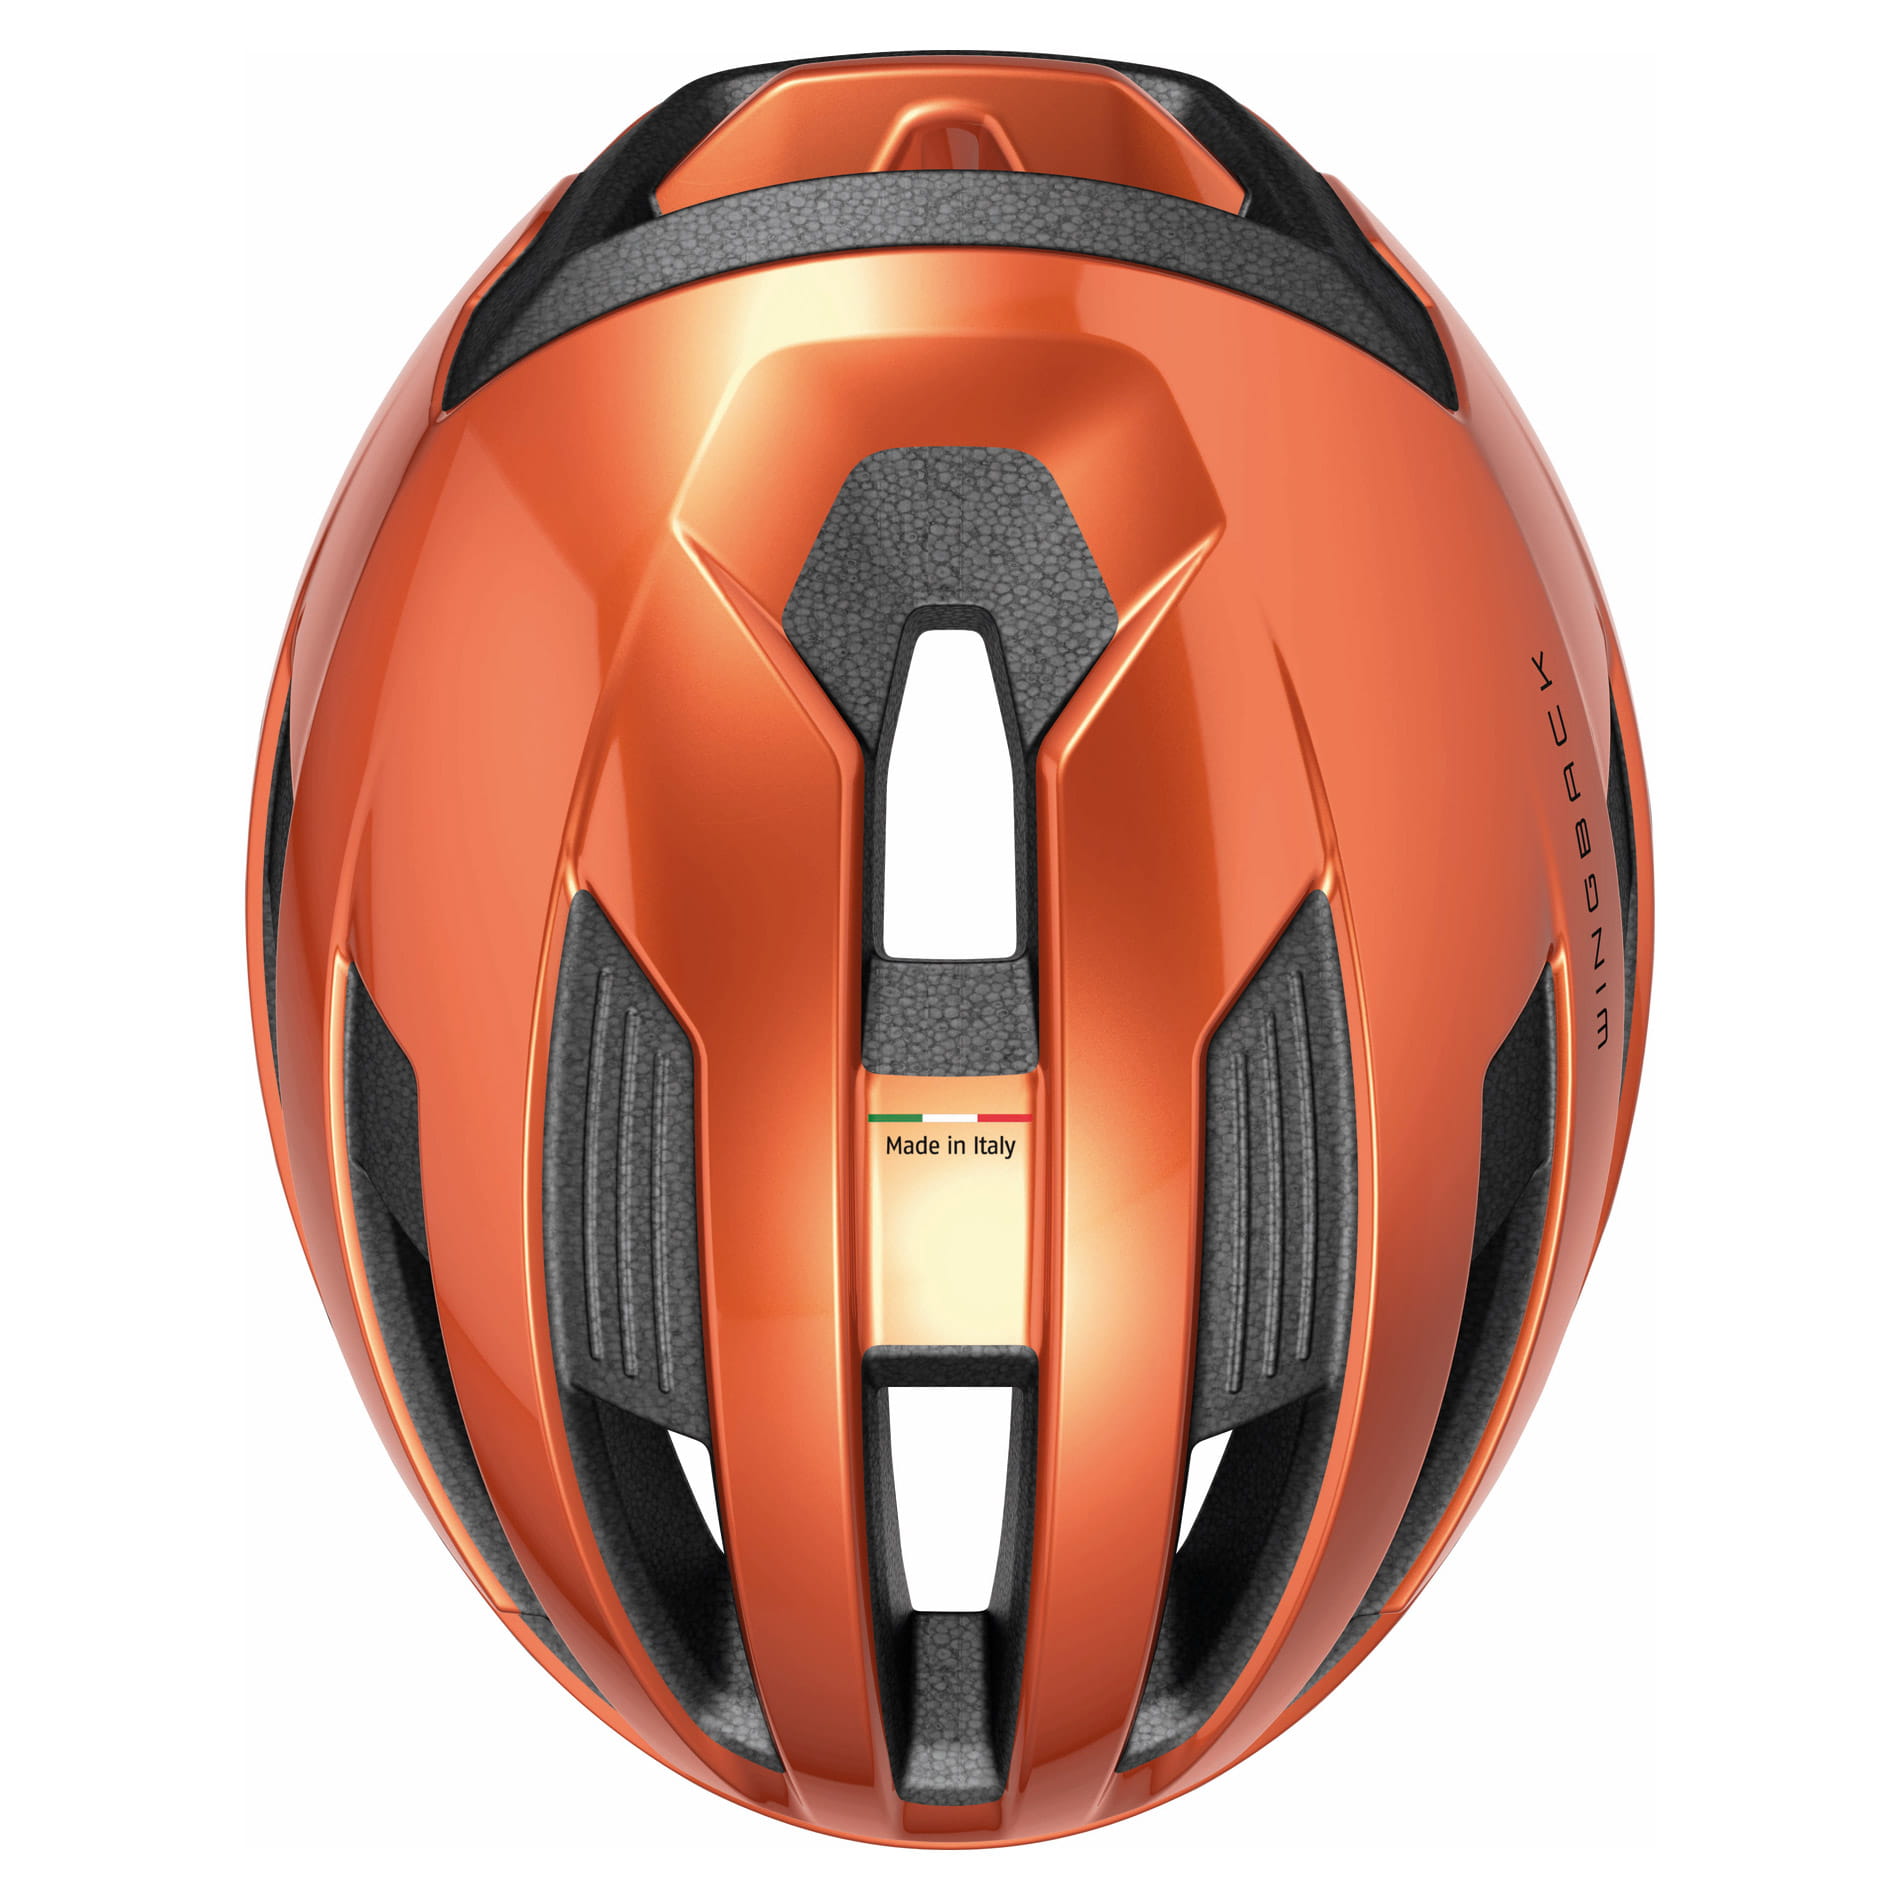 ABUS WingBack Road Helm